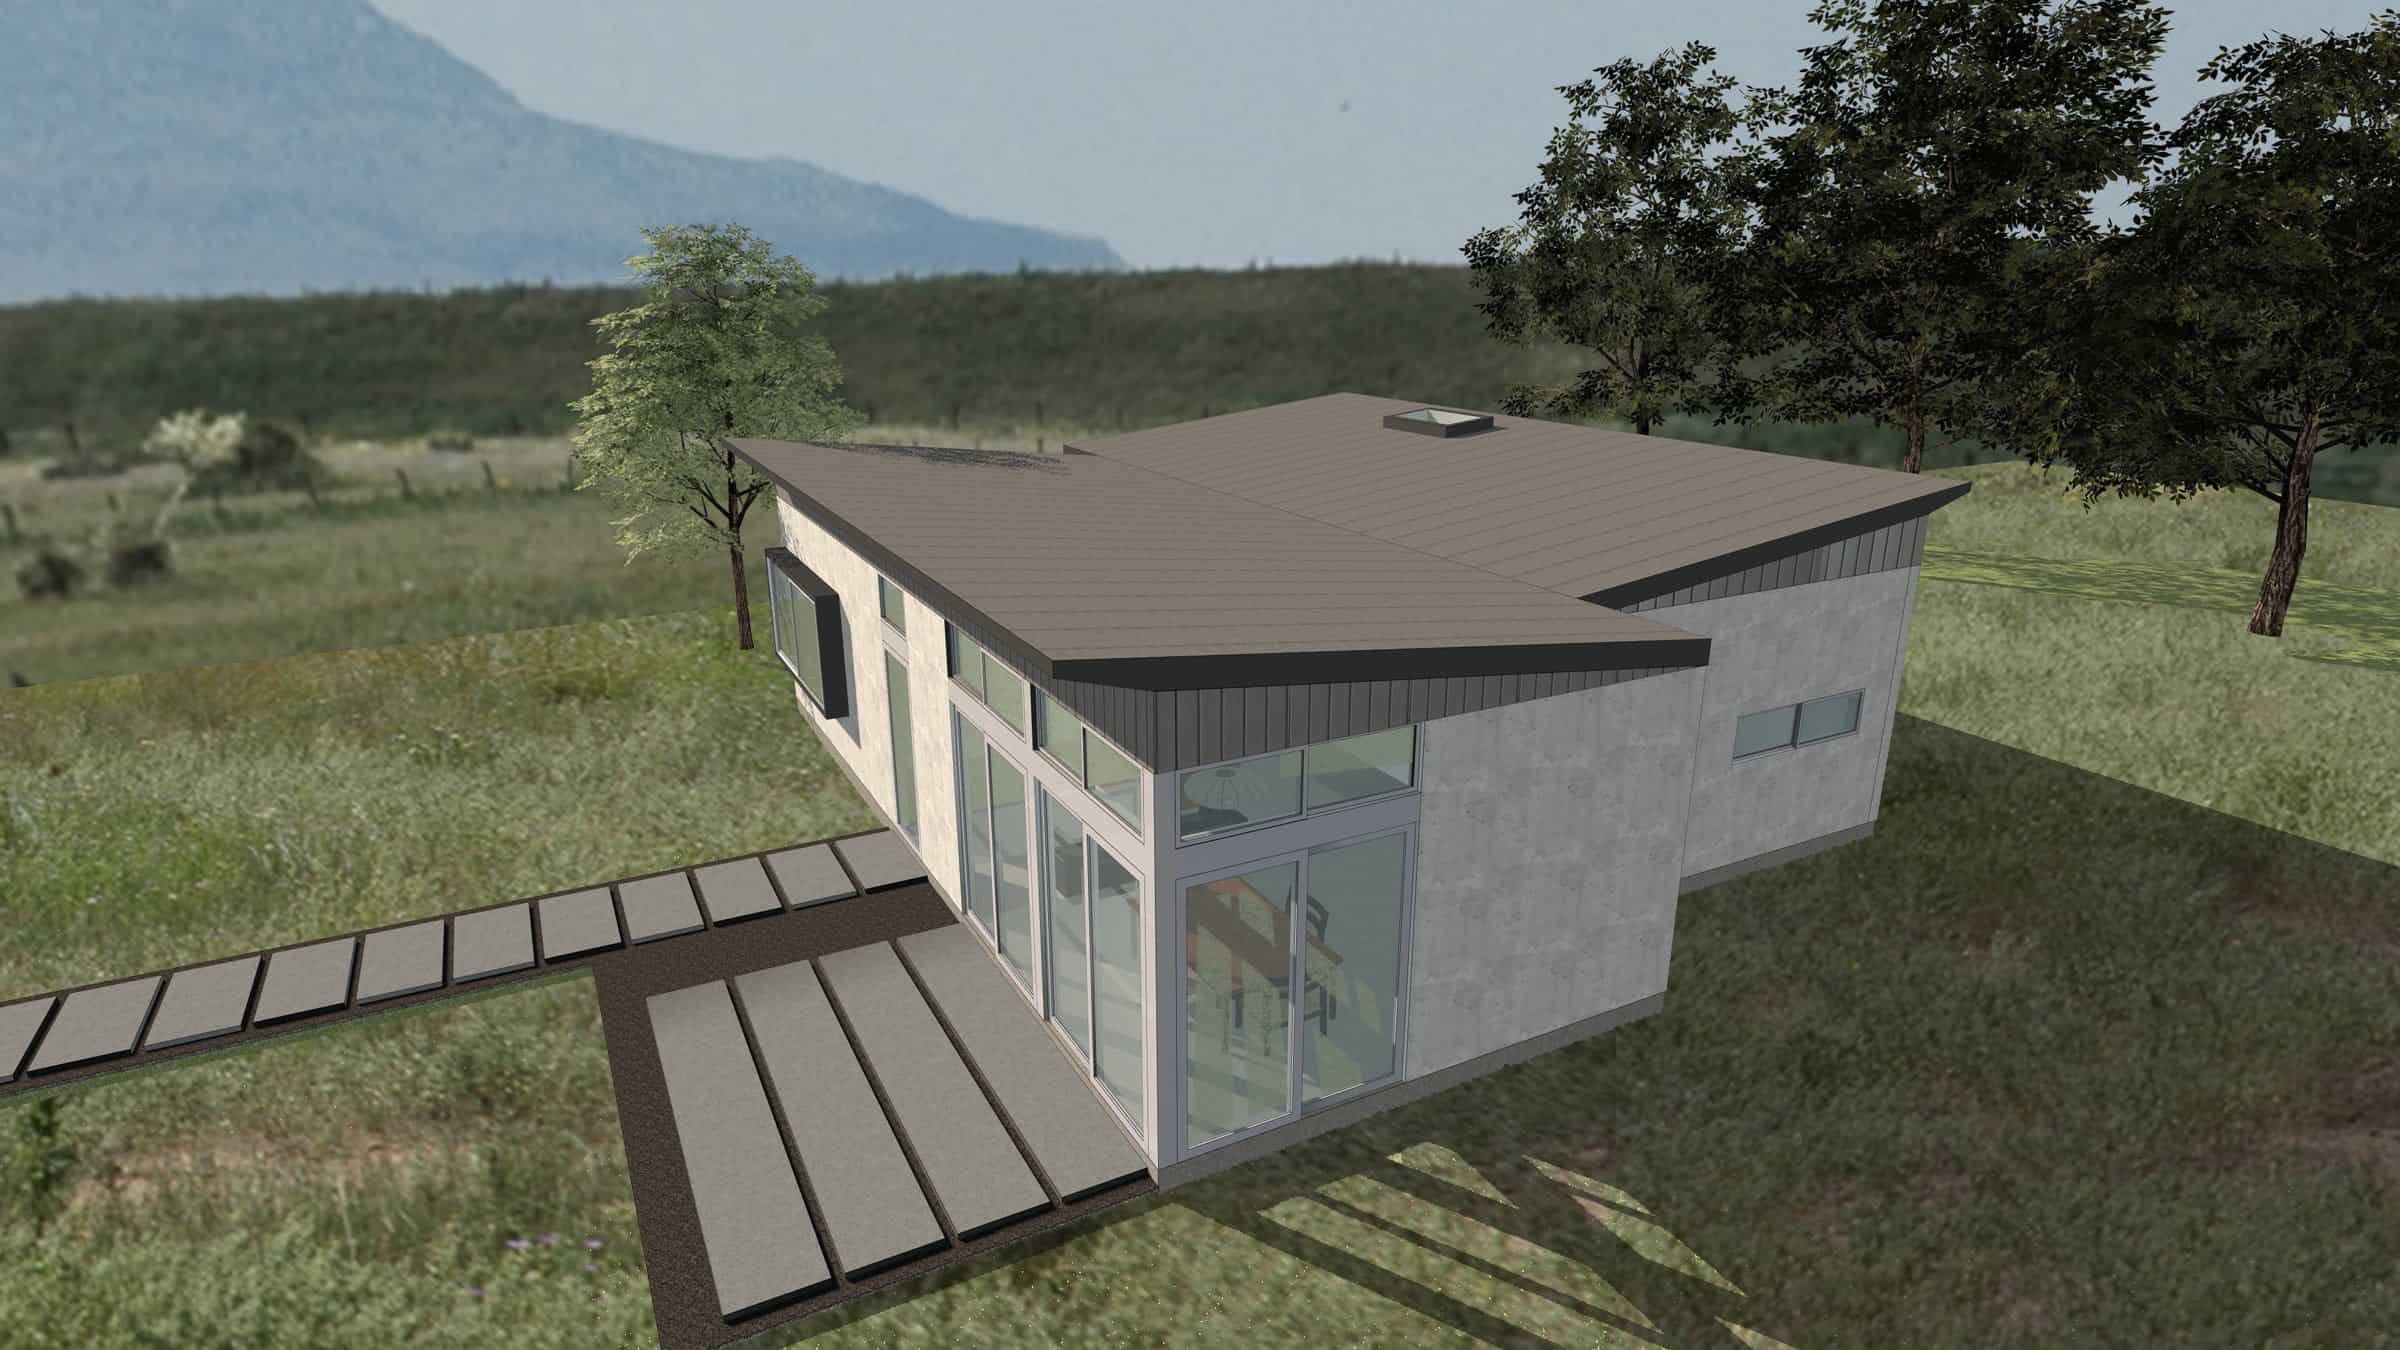 Casita 1100 modern prefab home rendering showing view from above.